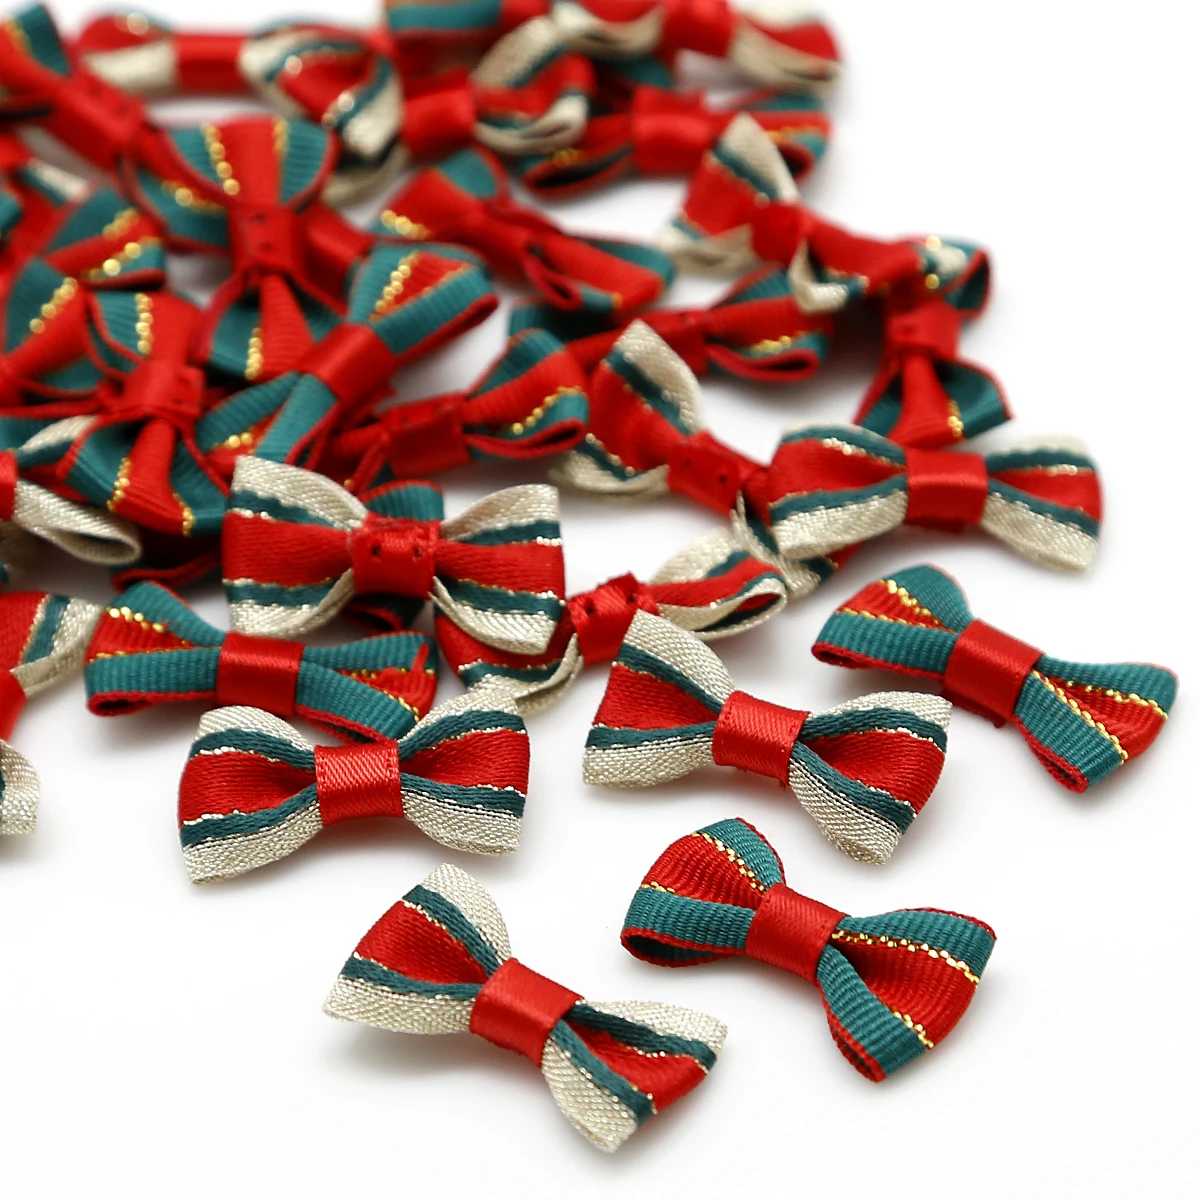 

3x1.5cm 20pcs Red/Green Satin Ribbon Bows For Sewing Christmas Bow Tie Decoration Handmade Party/Home/Garment/Hair Decoration